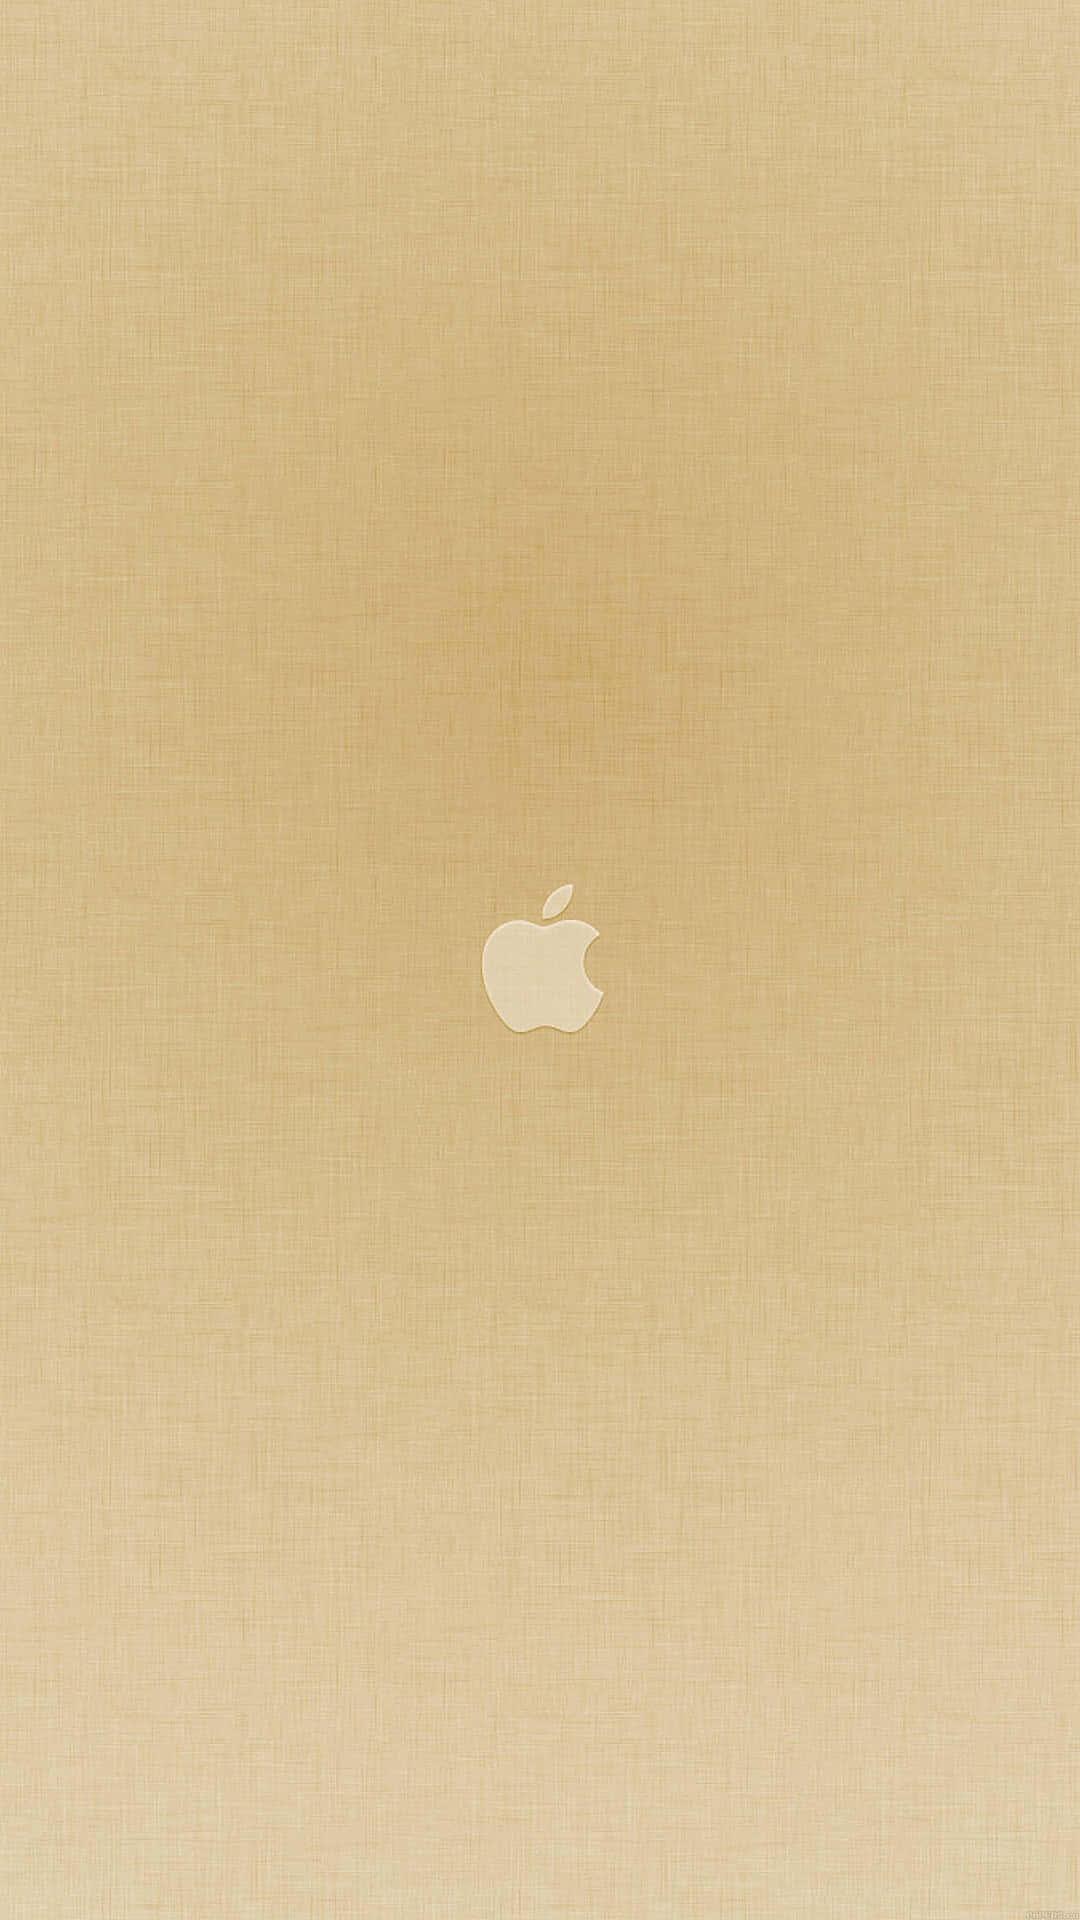 Shiny Gold iPhone Wallpaper